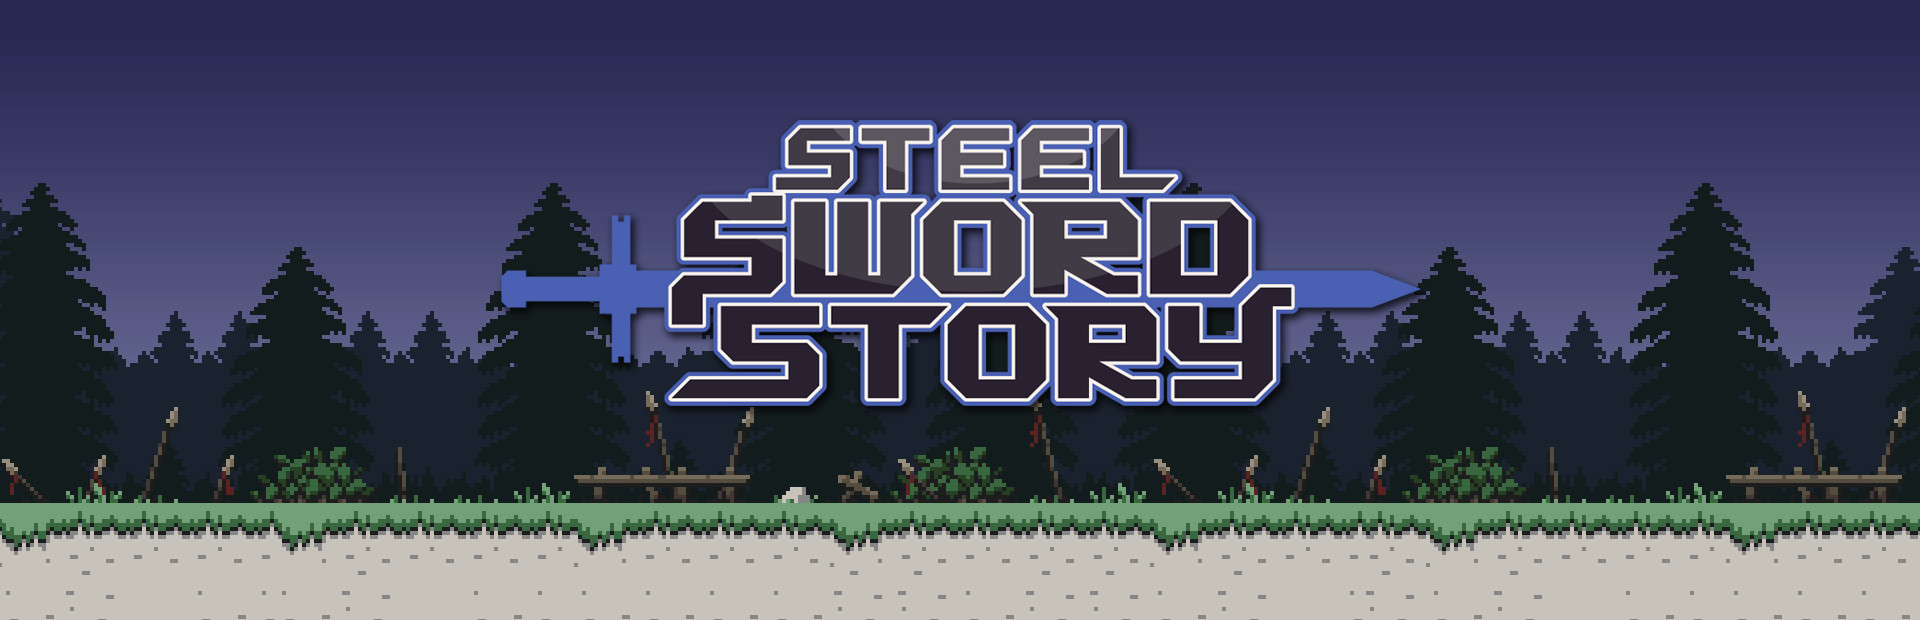 Steel Sword Story cover image